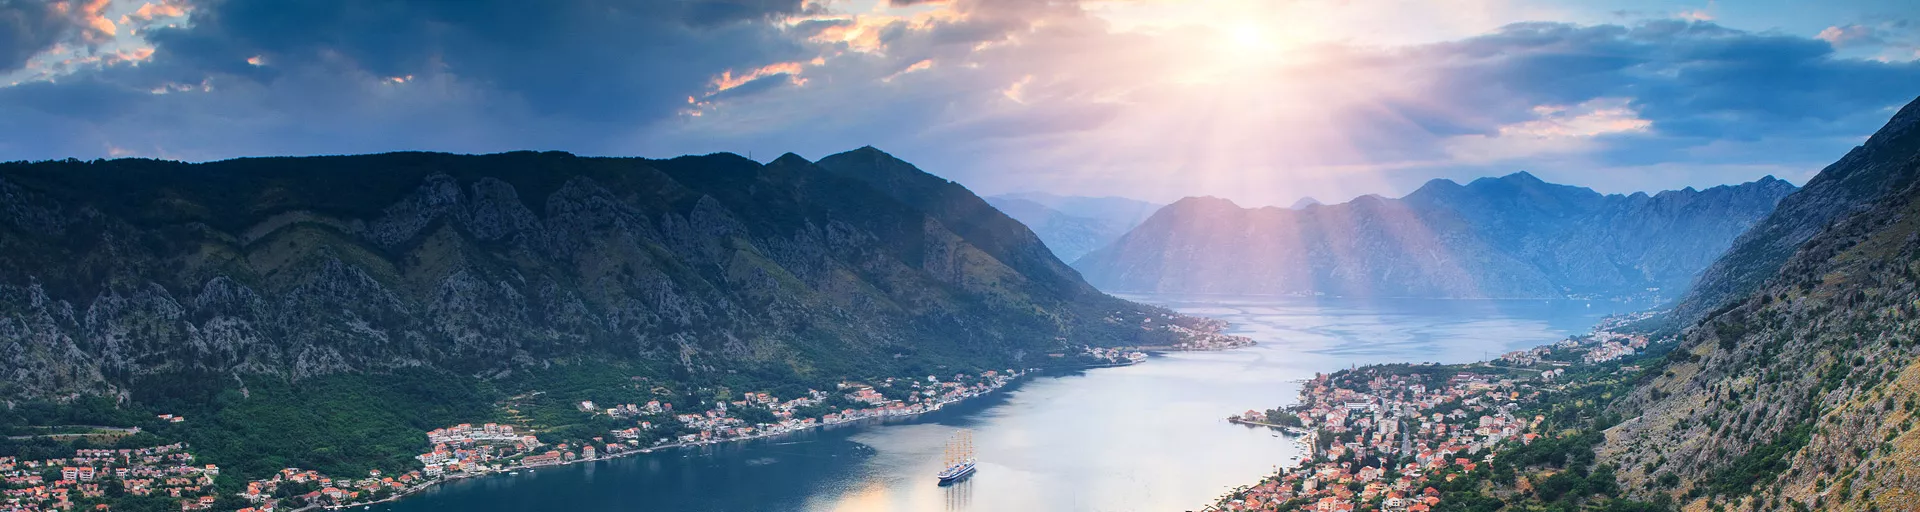 Montenegro Luxury Tours and Travel Guide